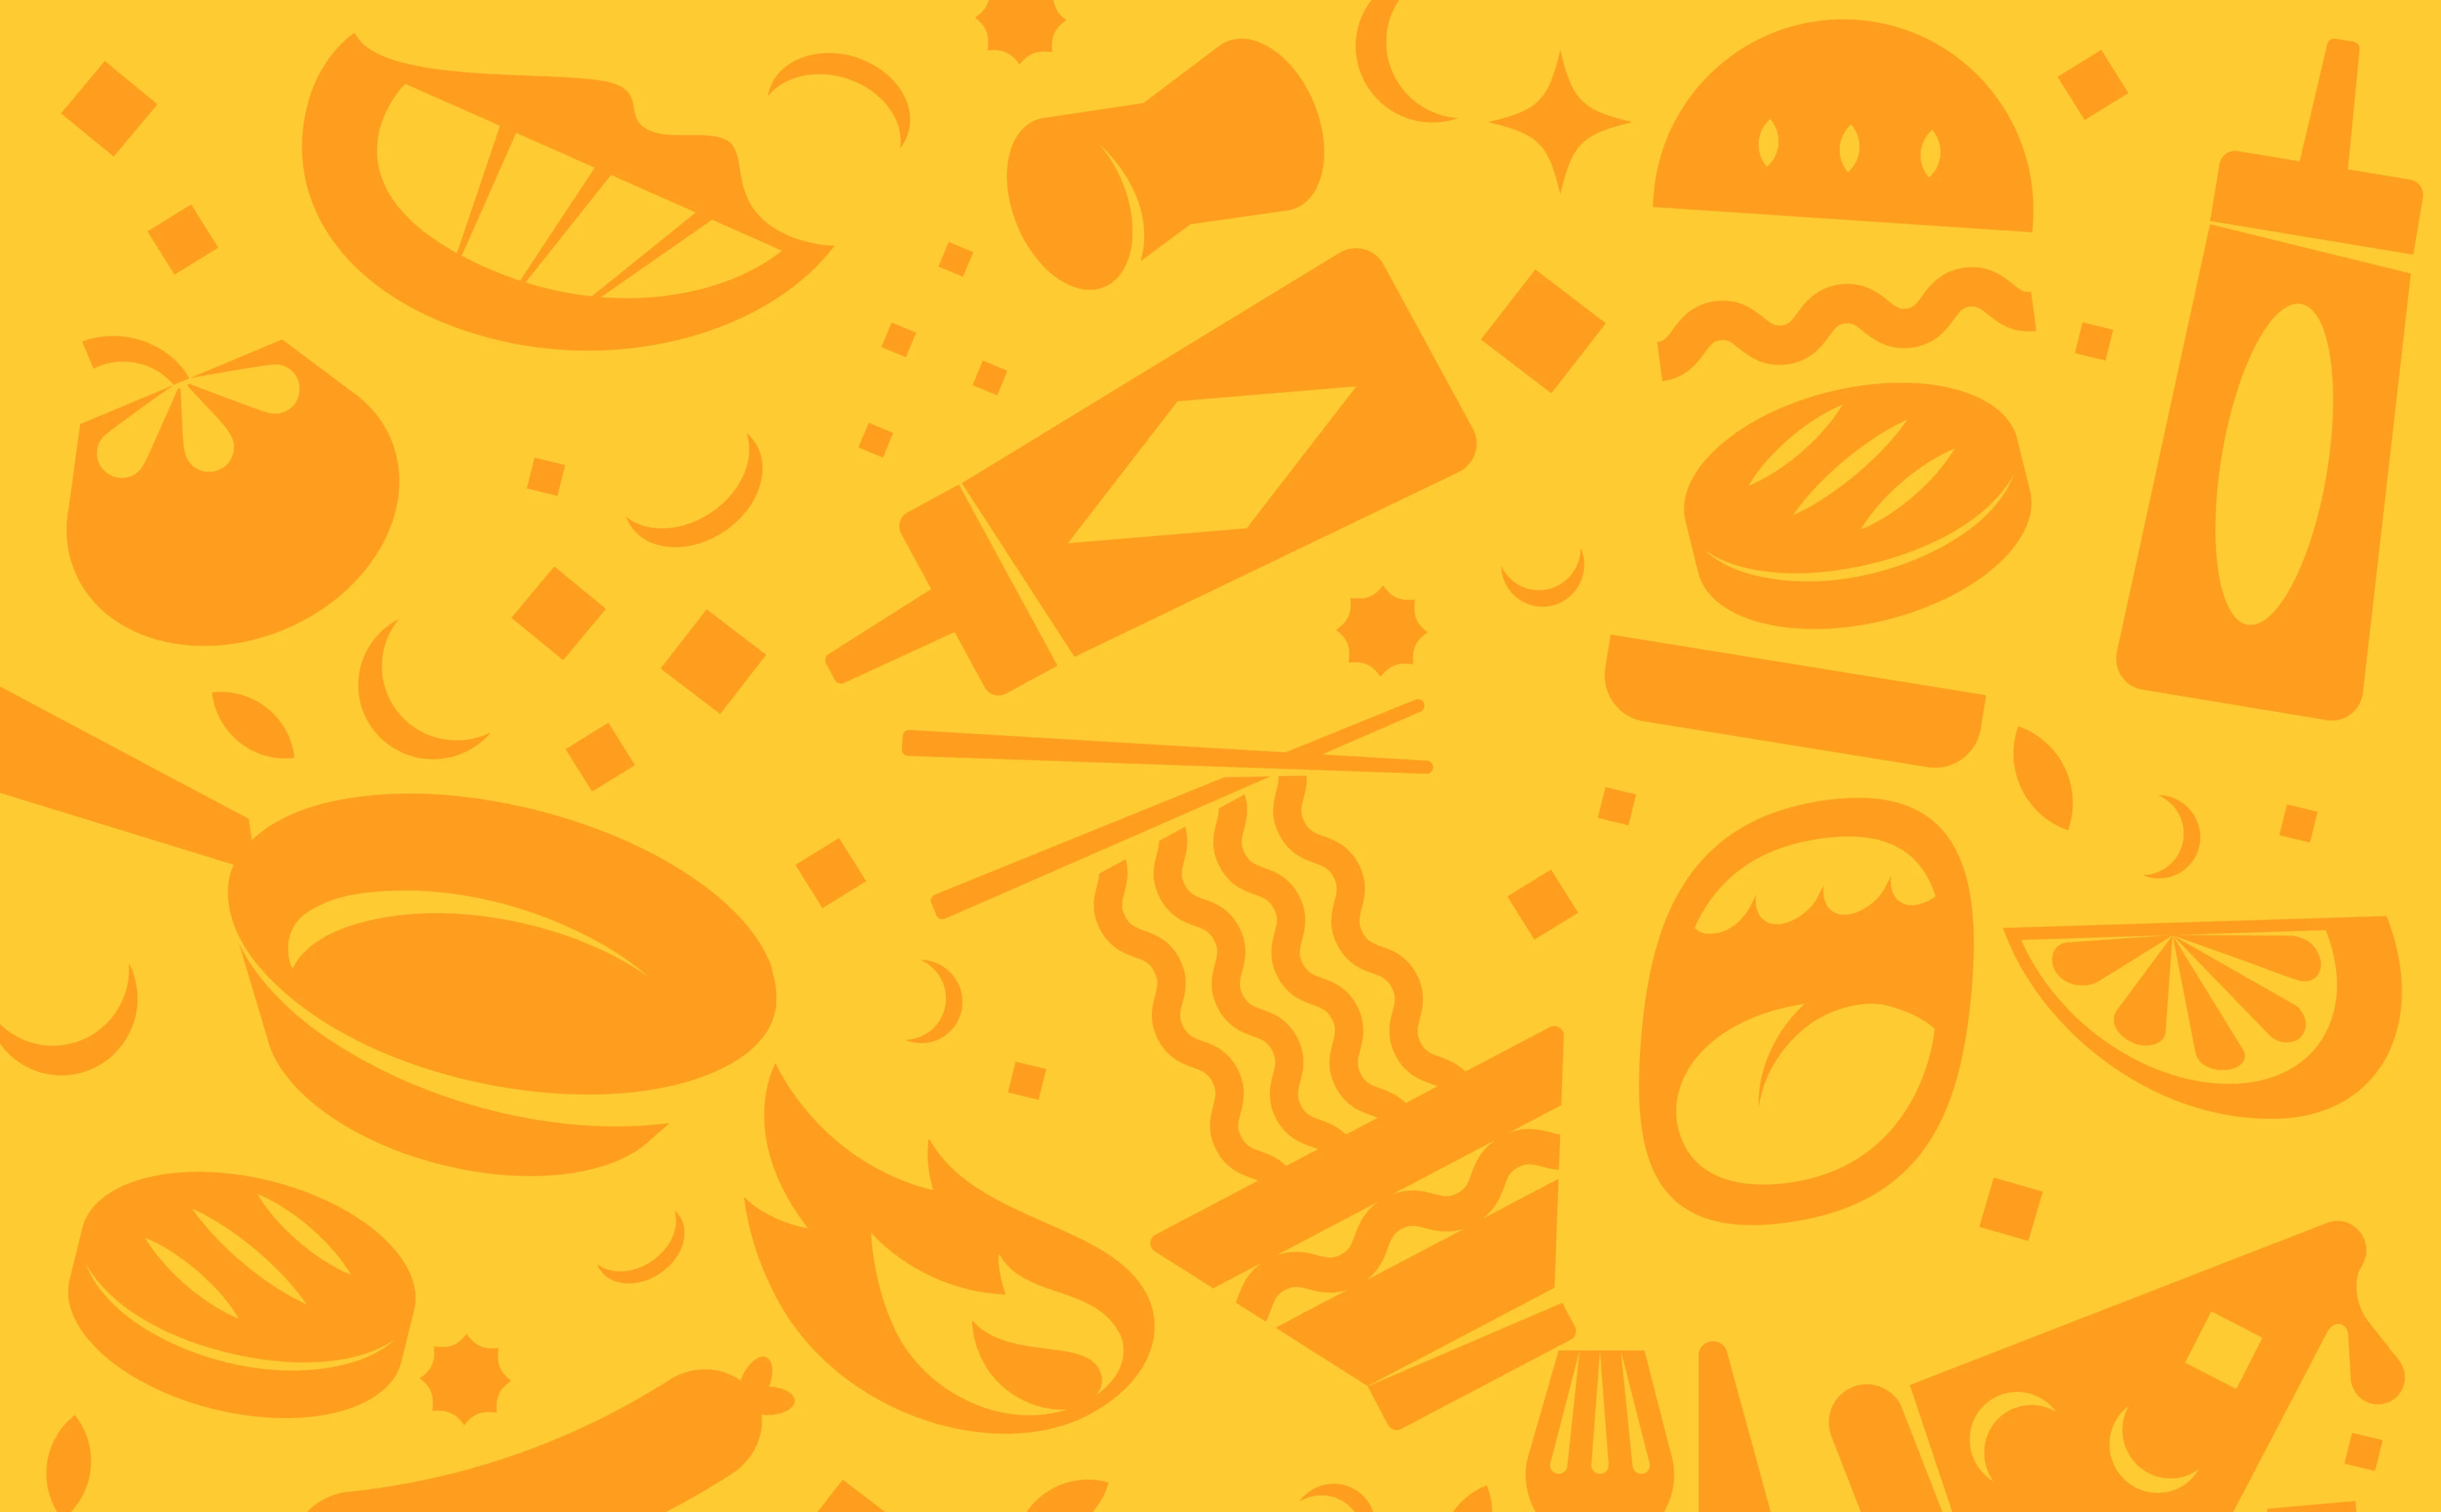 Yellow pattern design of the Impossible brand assets